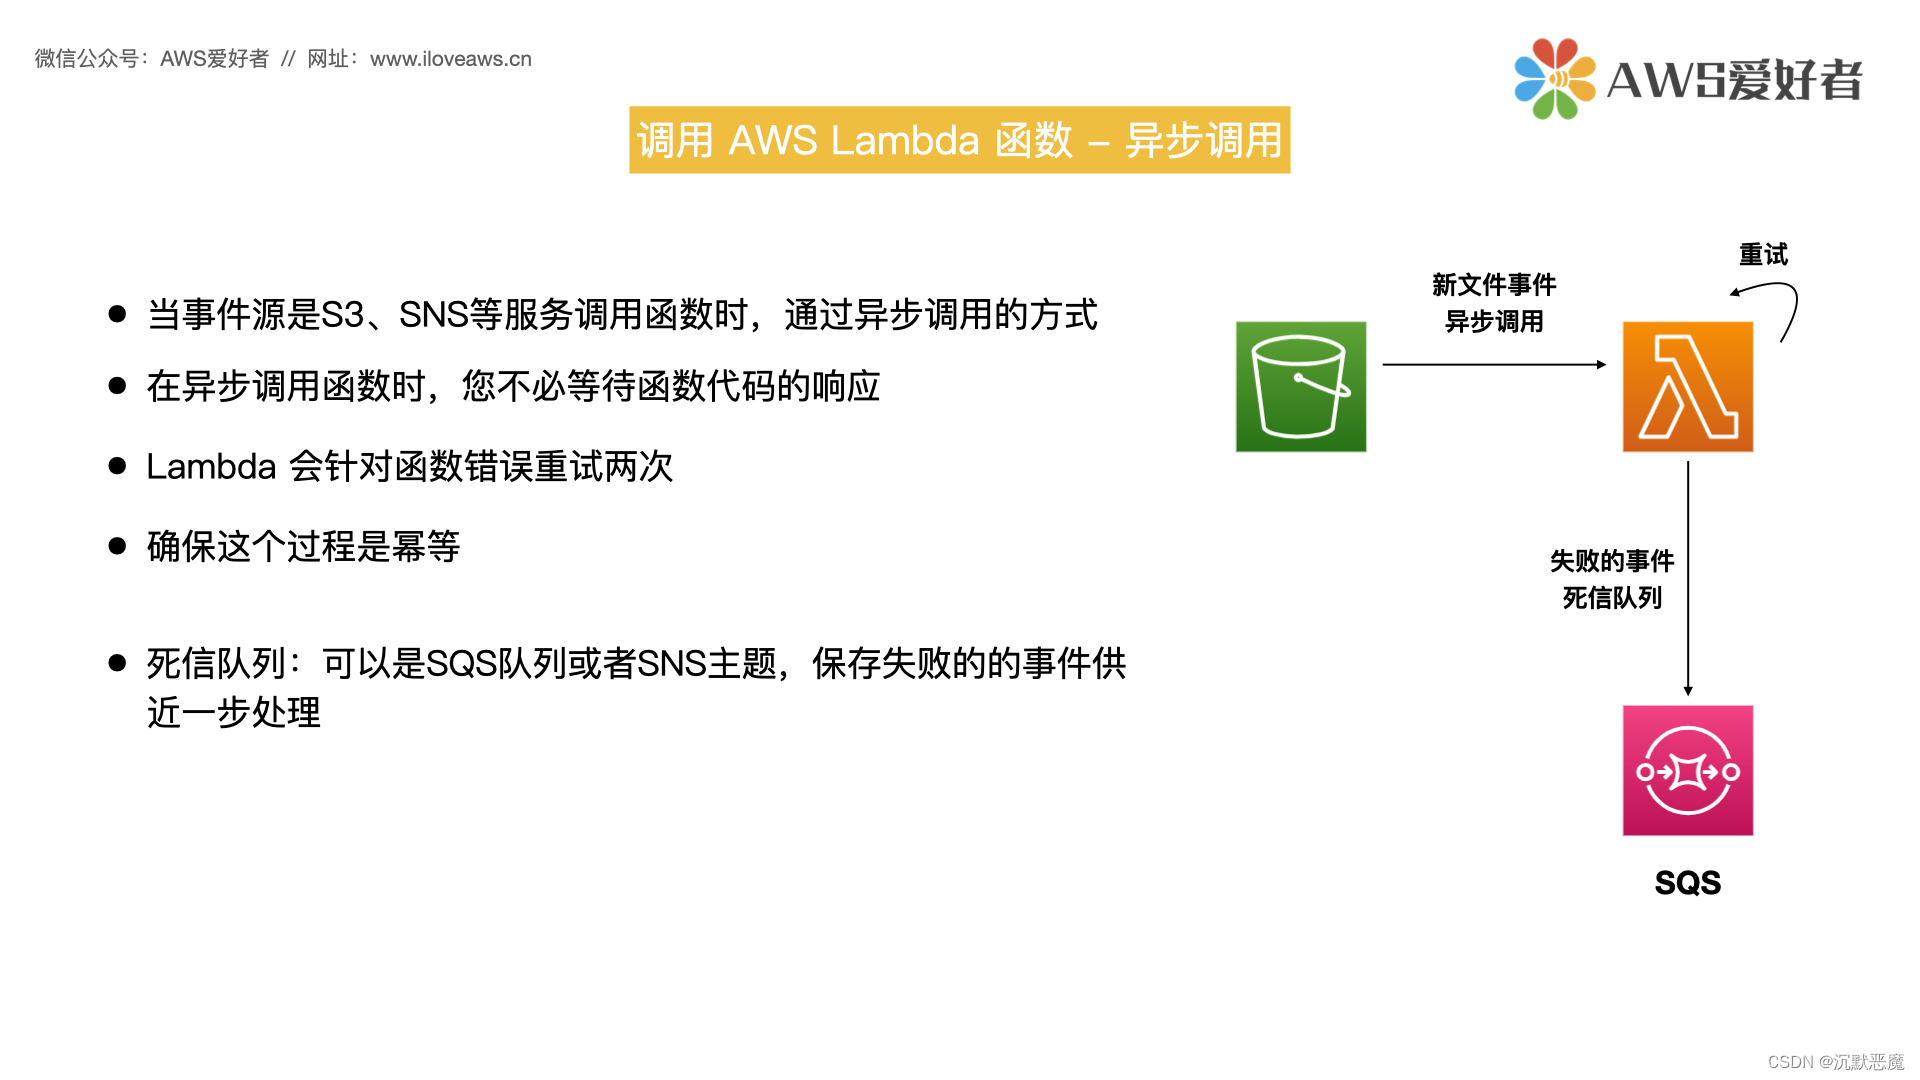 AWS Partners use AWS PrivateLink to connect privately to Amazon S3 ...